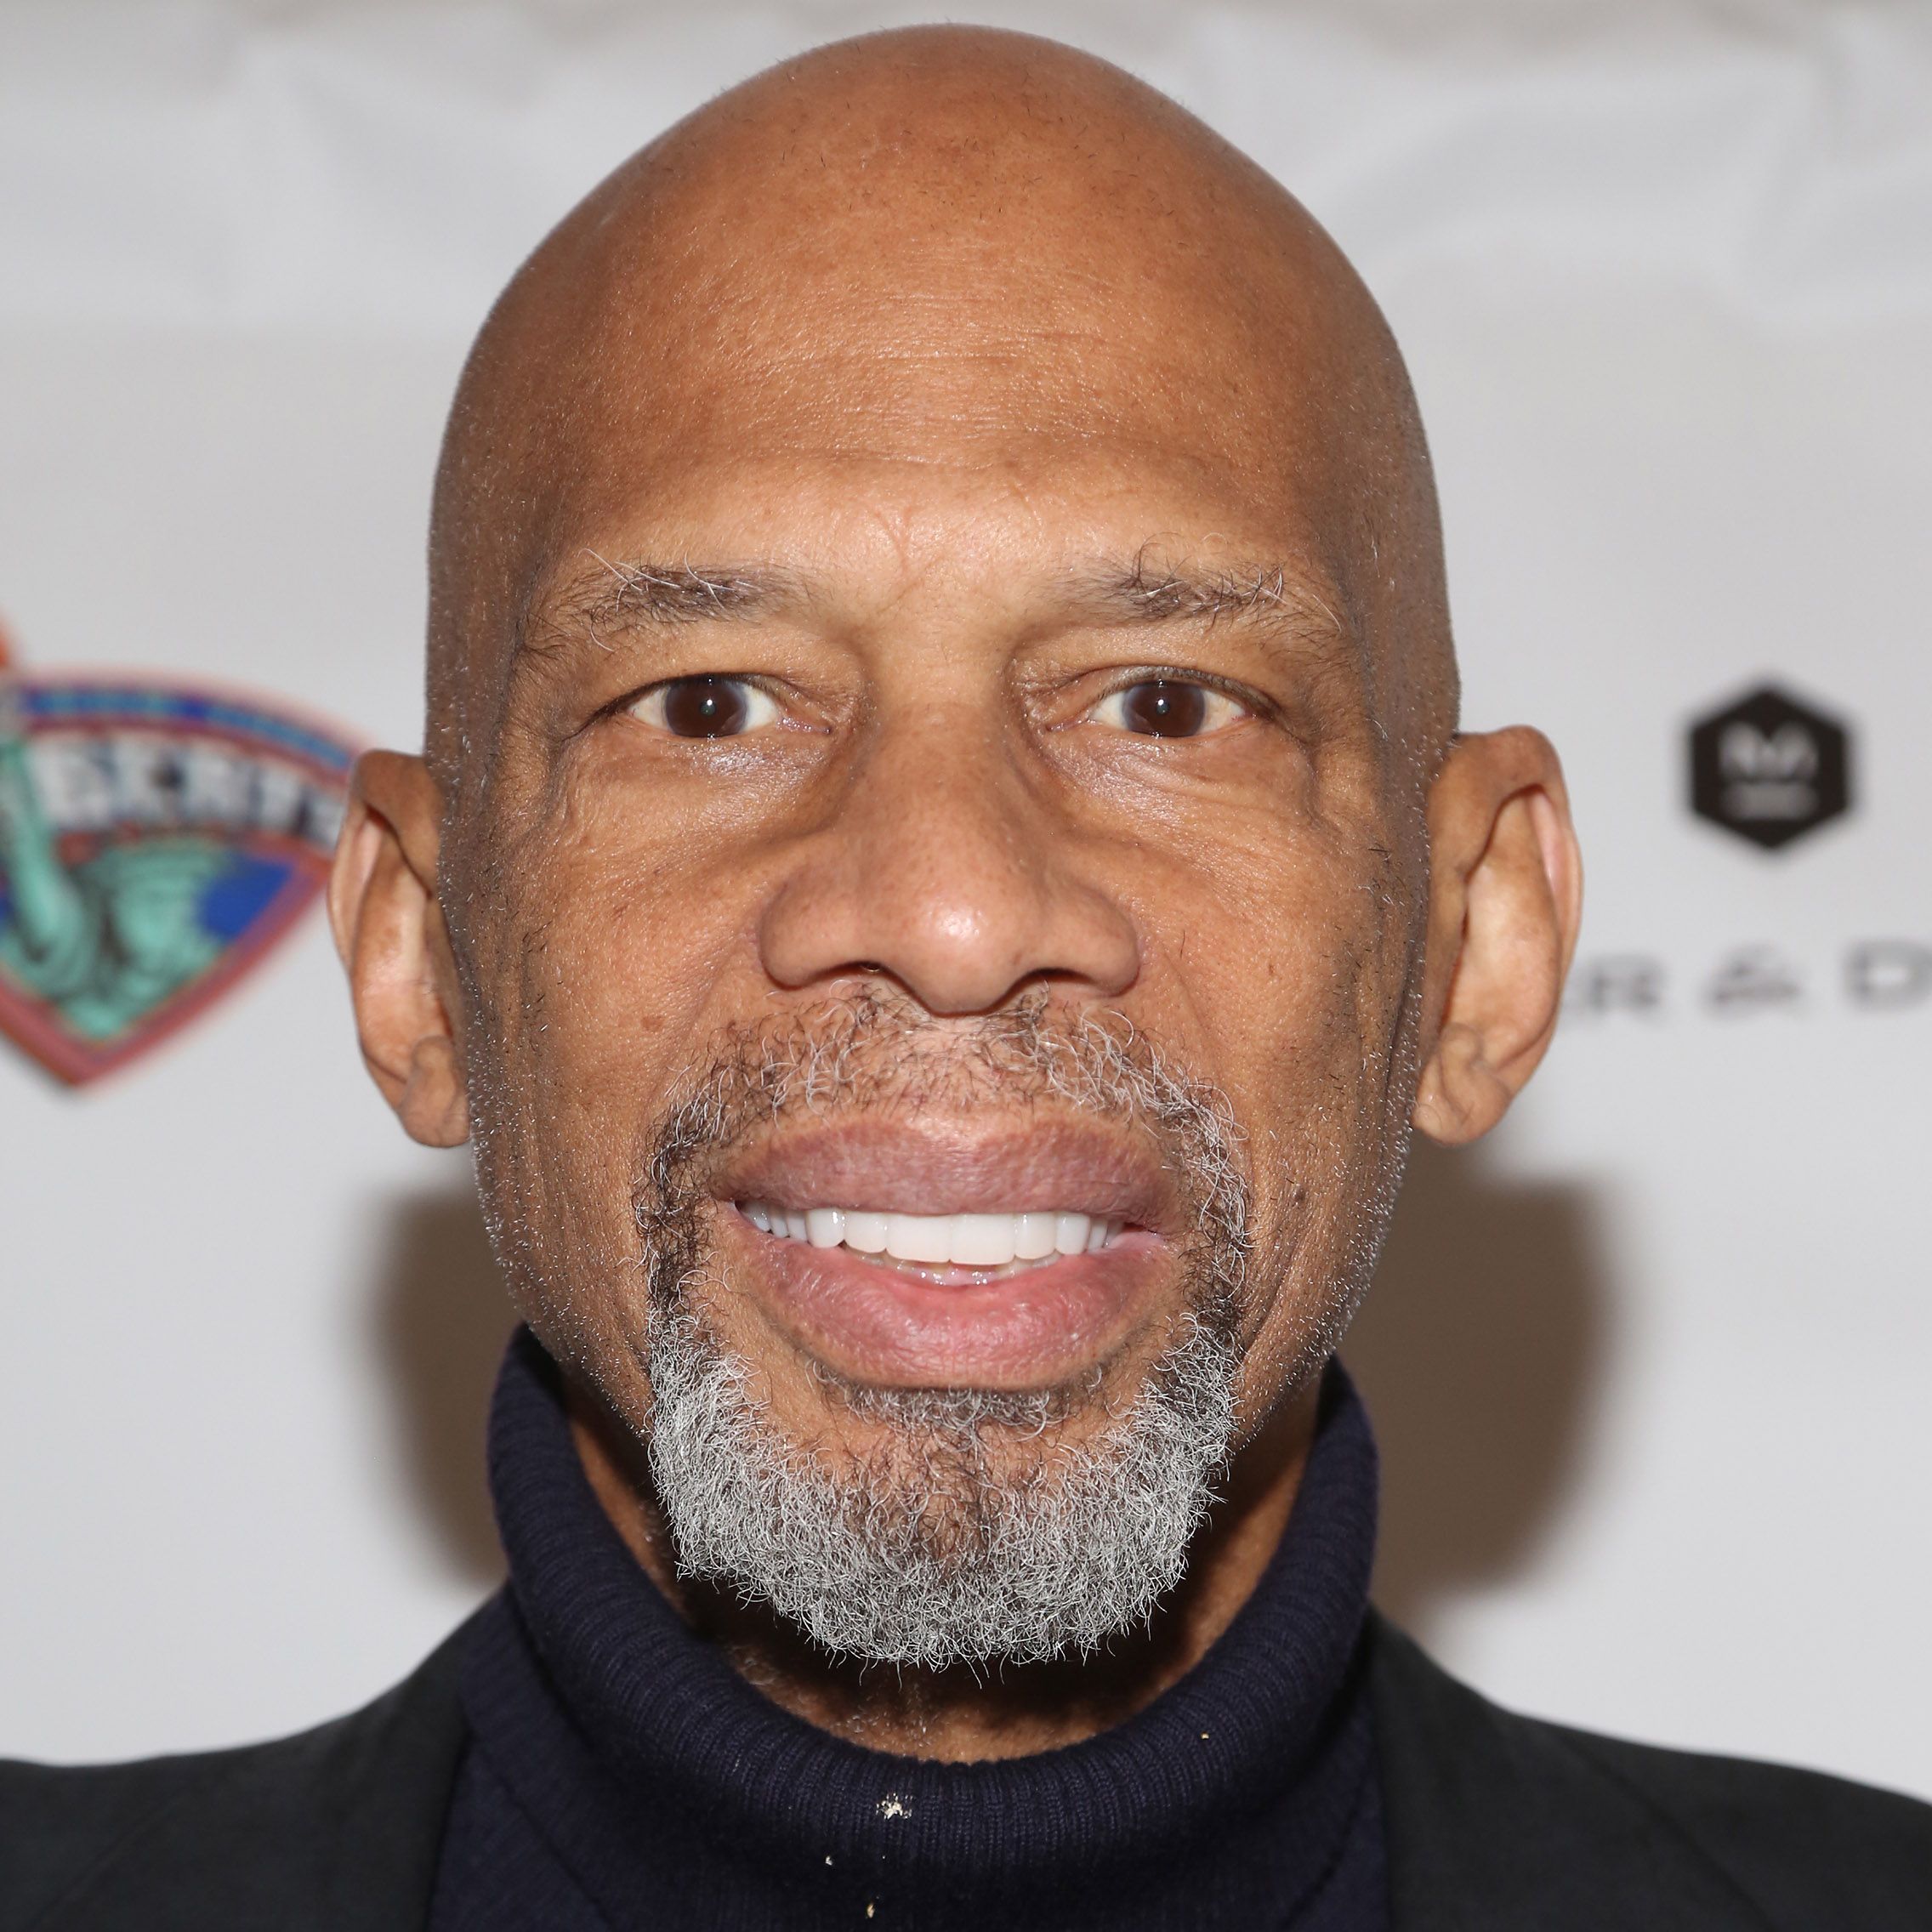 What If The Knicks Traded For Harlem's Kareem Abdul-Jabbar In 1975?